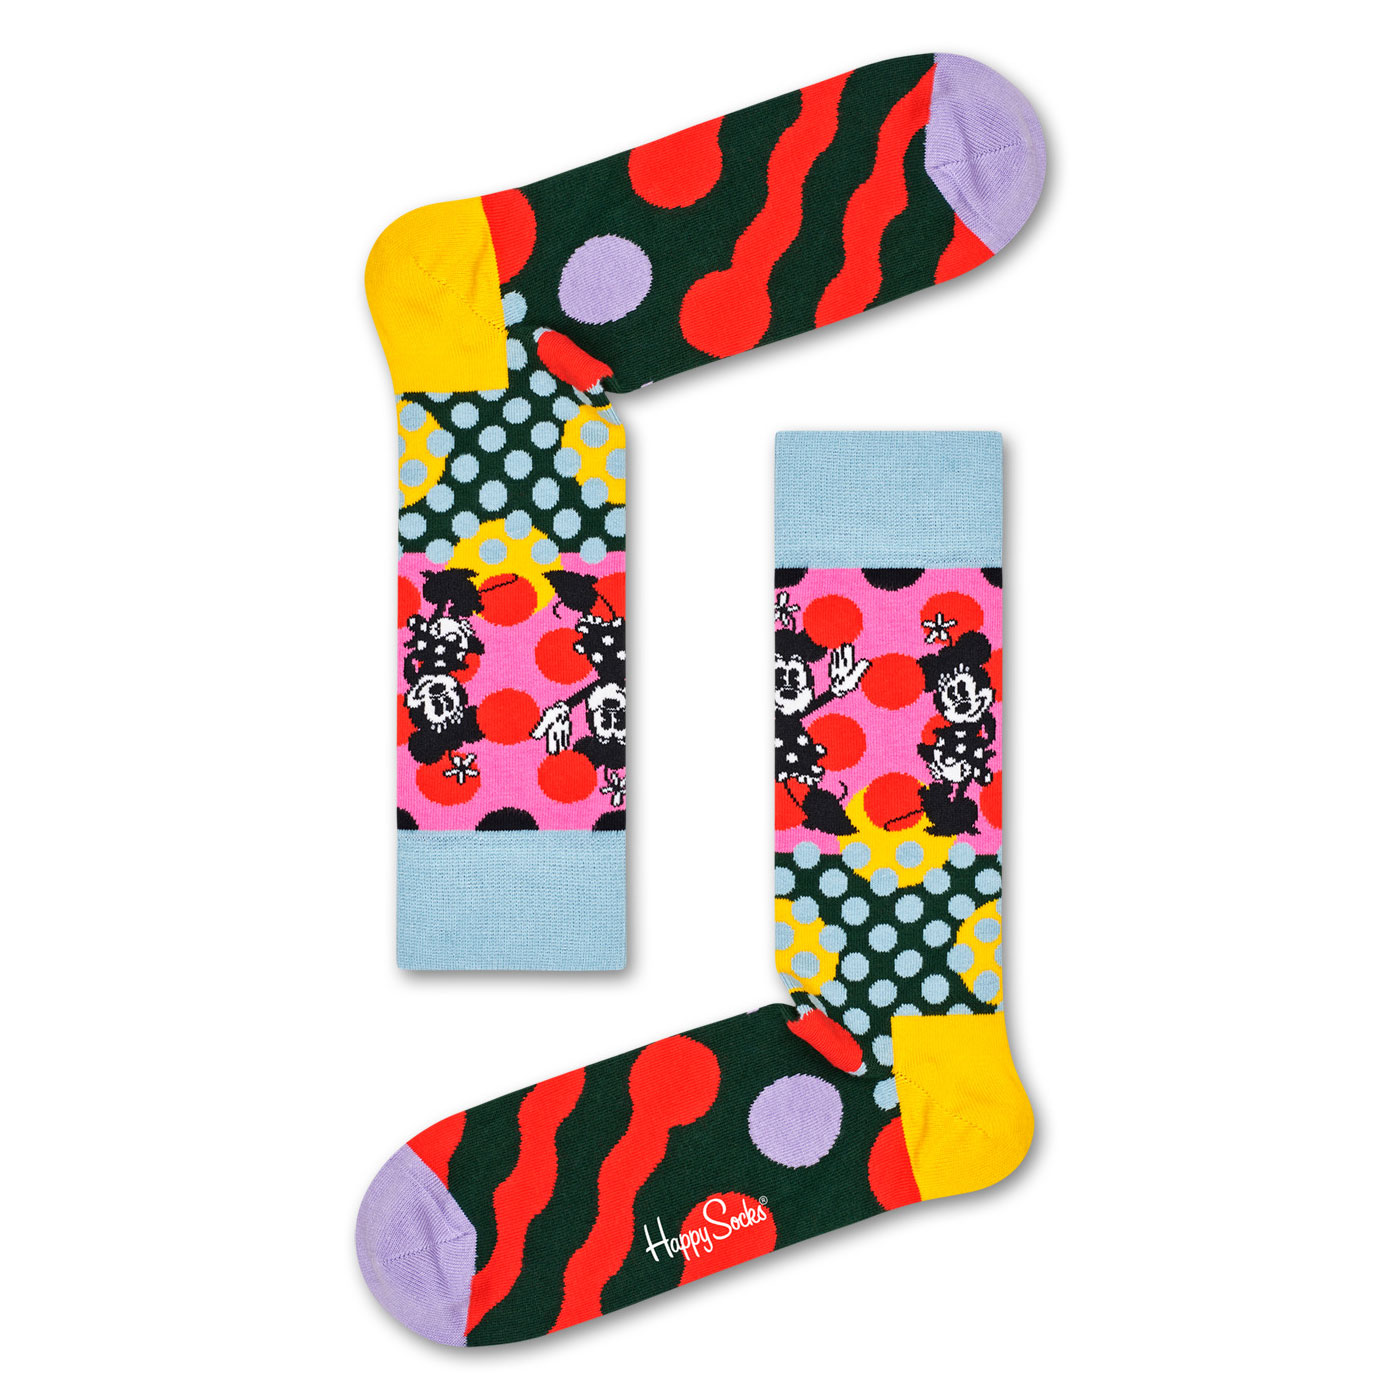 Disney Minnie-Time Sock(41-46) <img src="/banner_images/banner_0000000180.gif">